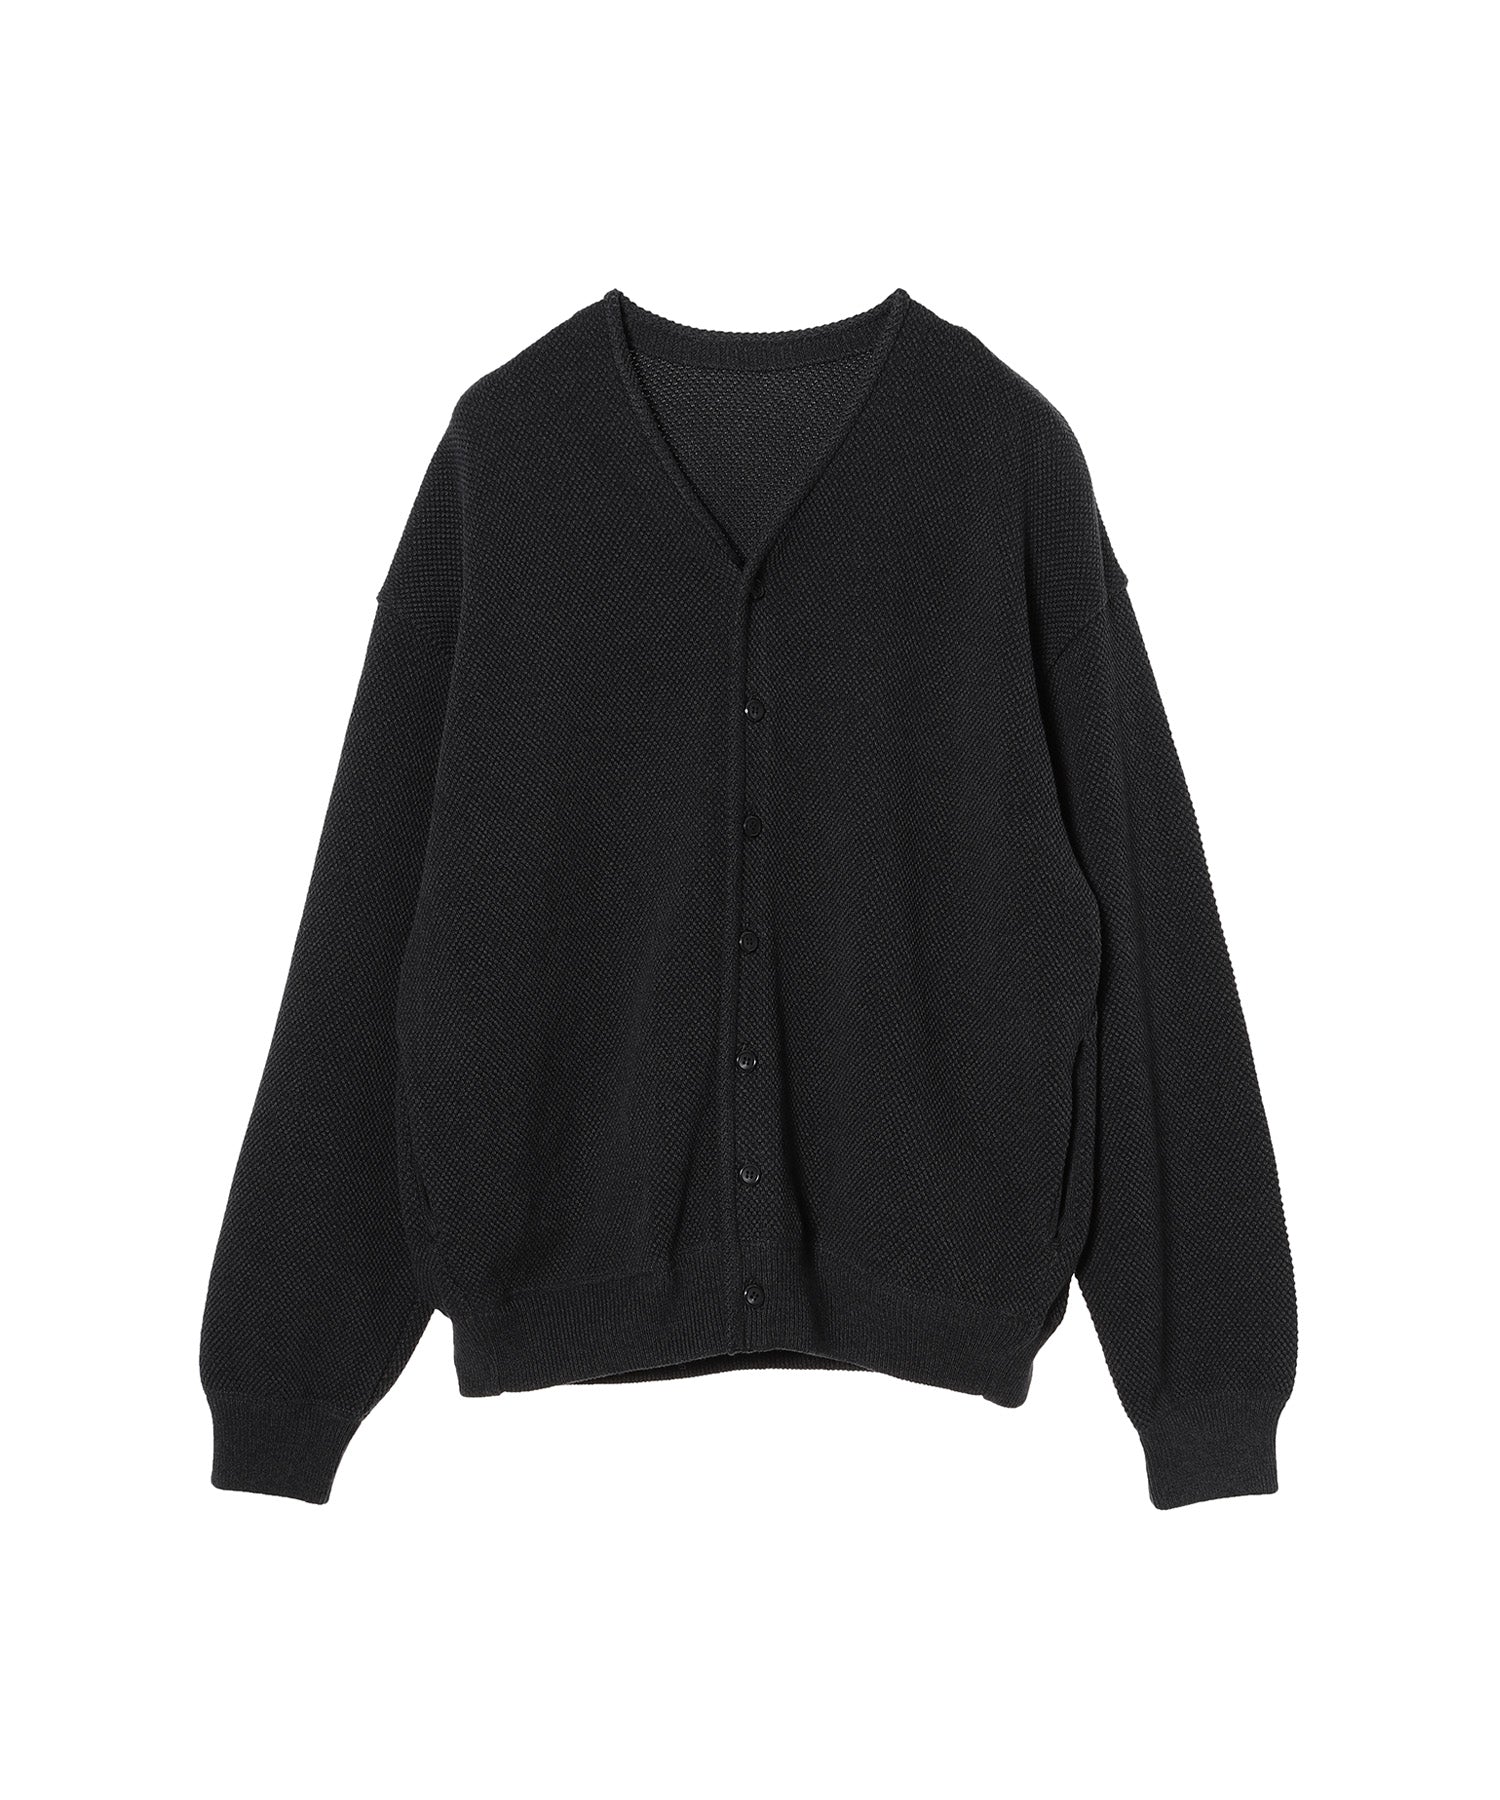 Moss Stitch V/N Cardigan - crepuscule (クレプスキュール) - tops 